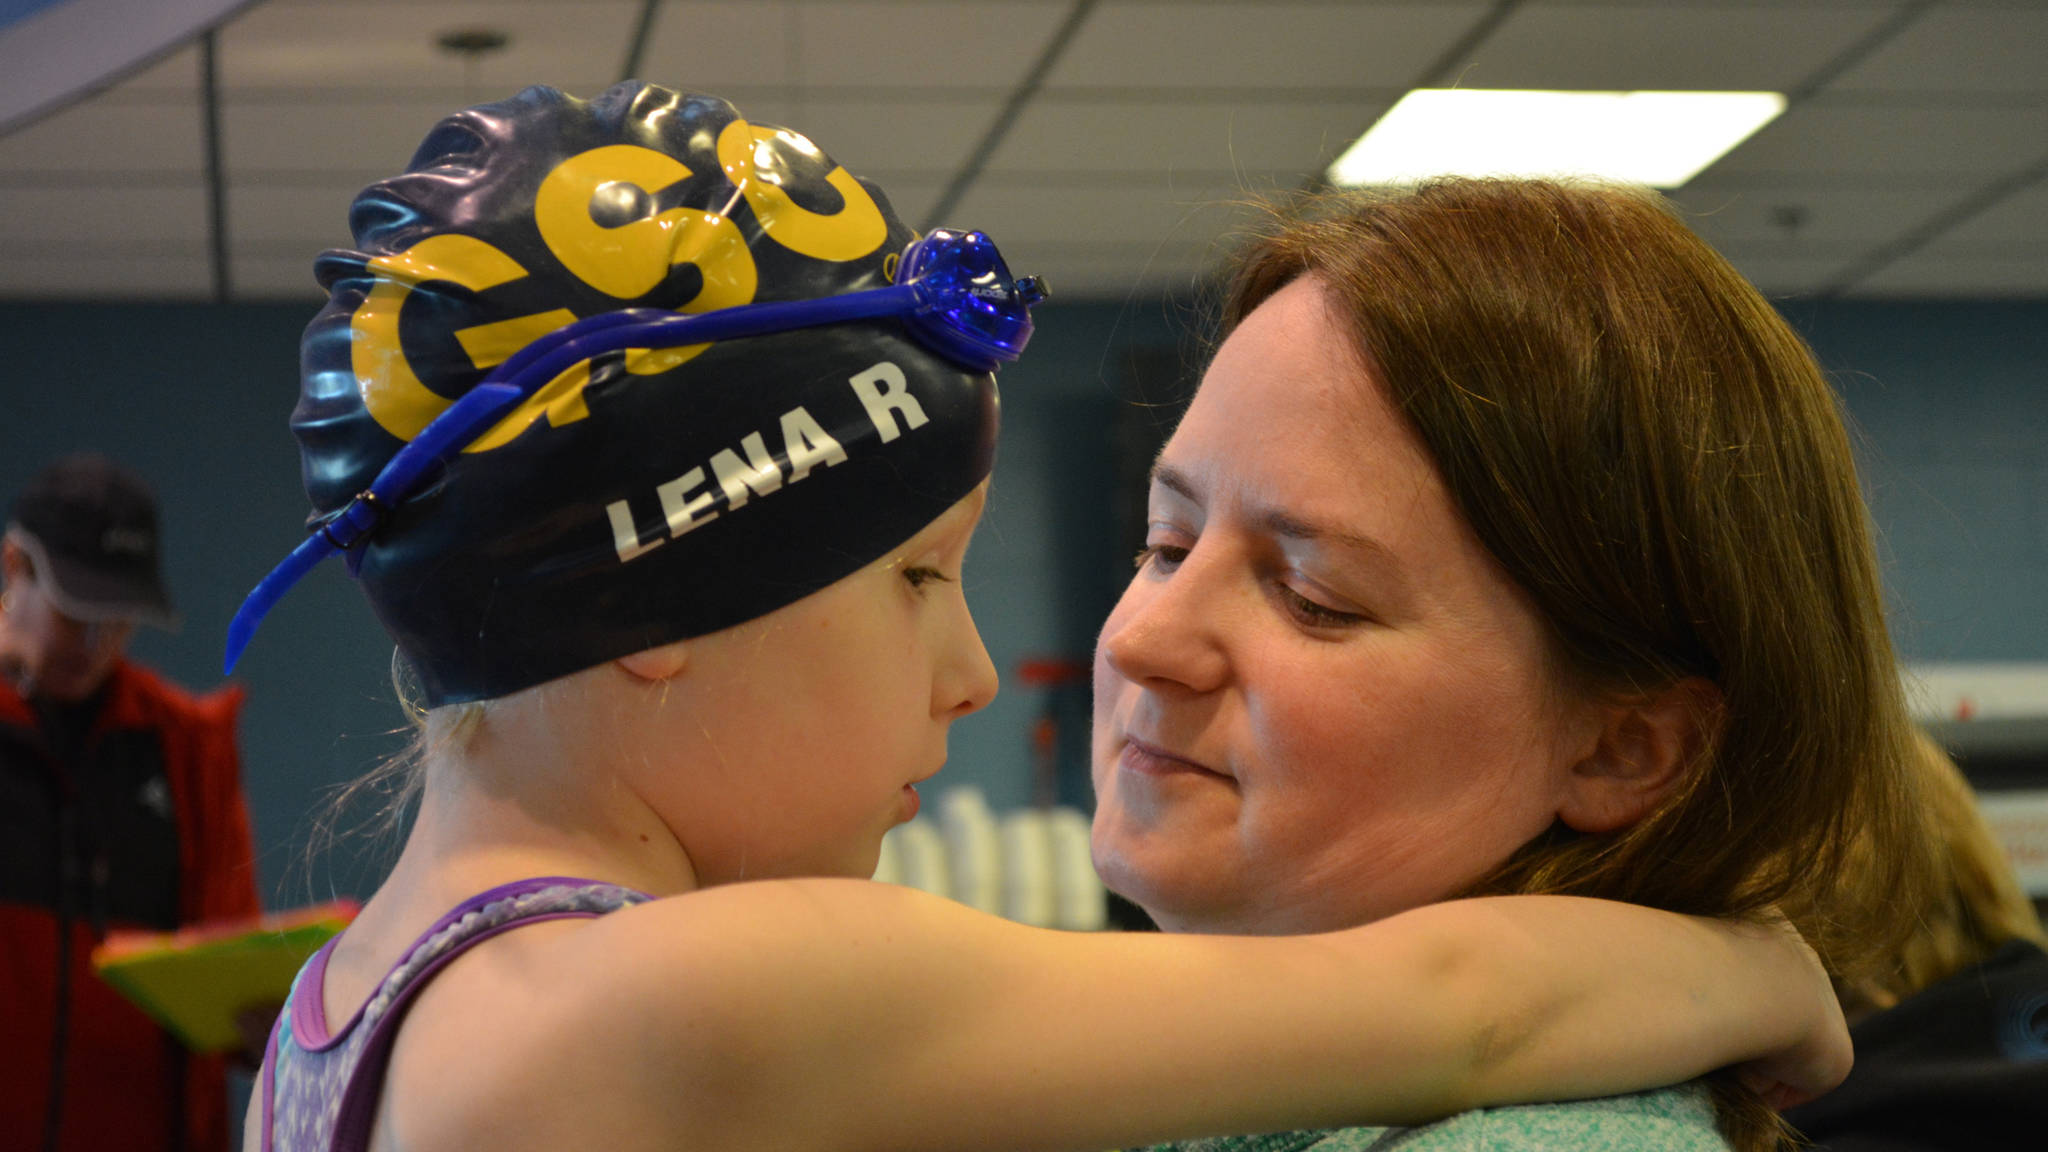 Lena Rasmussen gets some pre-race encouragement from her mother inside the Dimond Park Aquatic Center, Saturday, May 6. Around 60 kids competed in the long and short courses for no fee. (Photo courtesy Michelle Rochette)